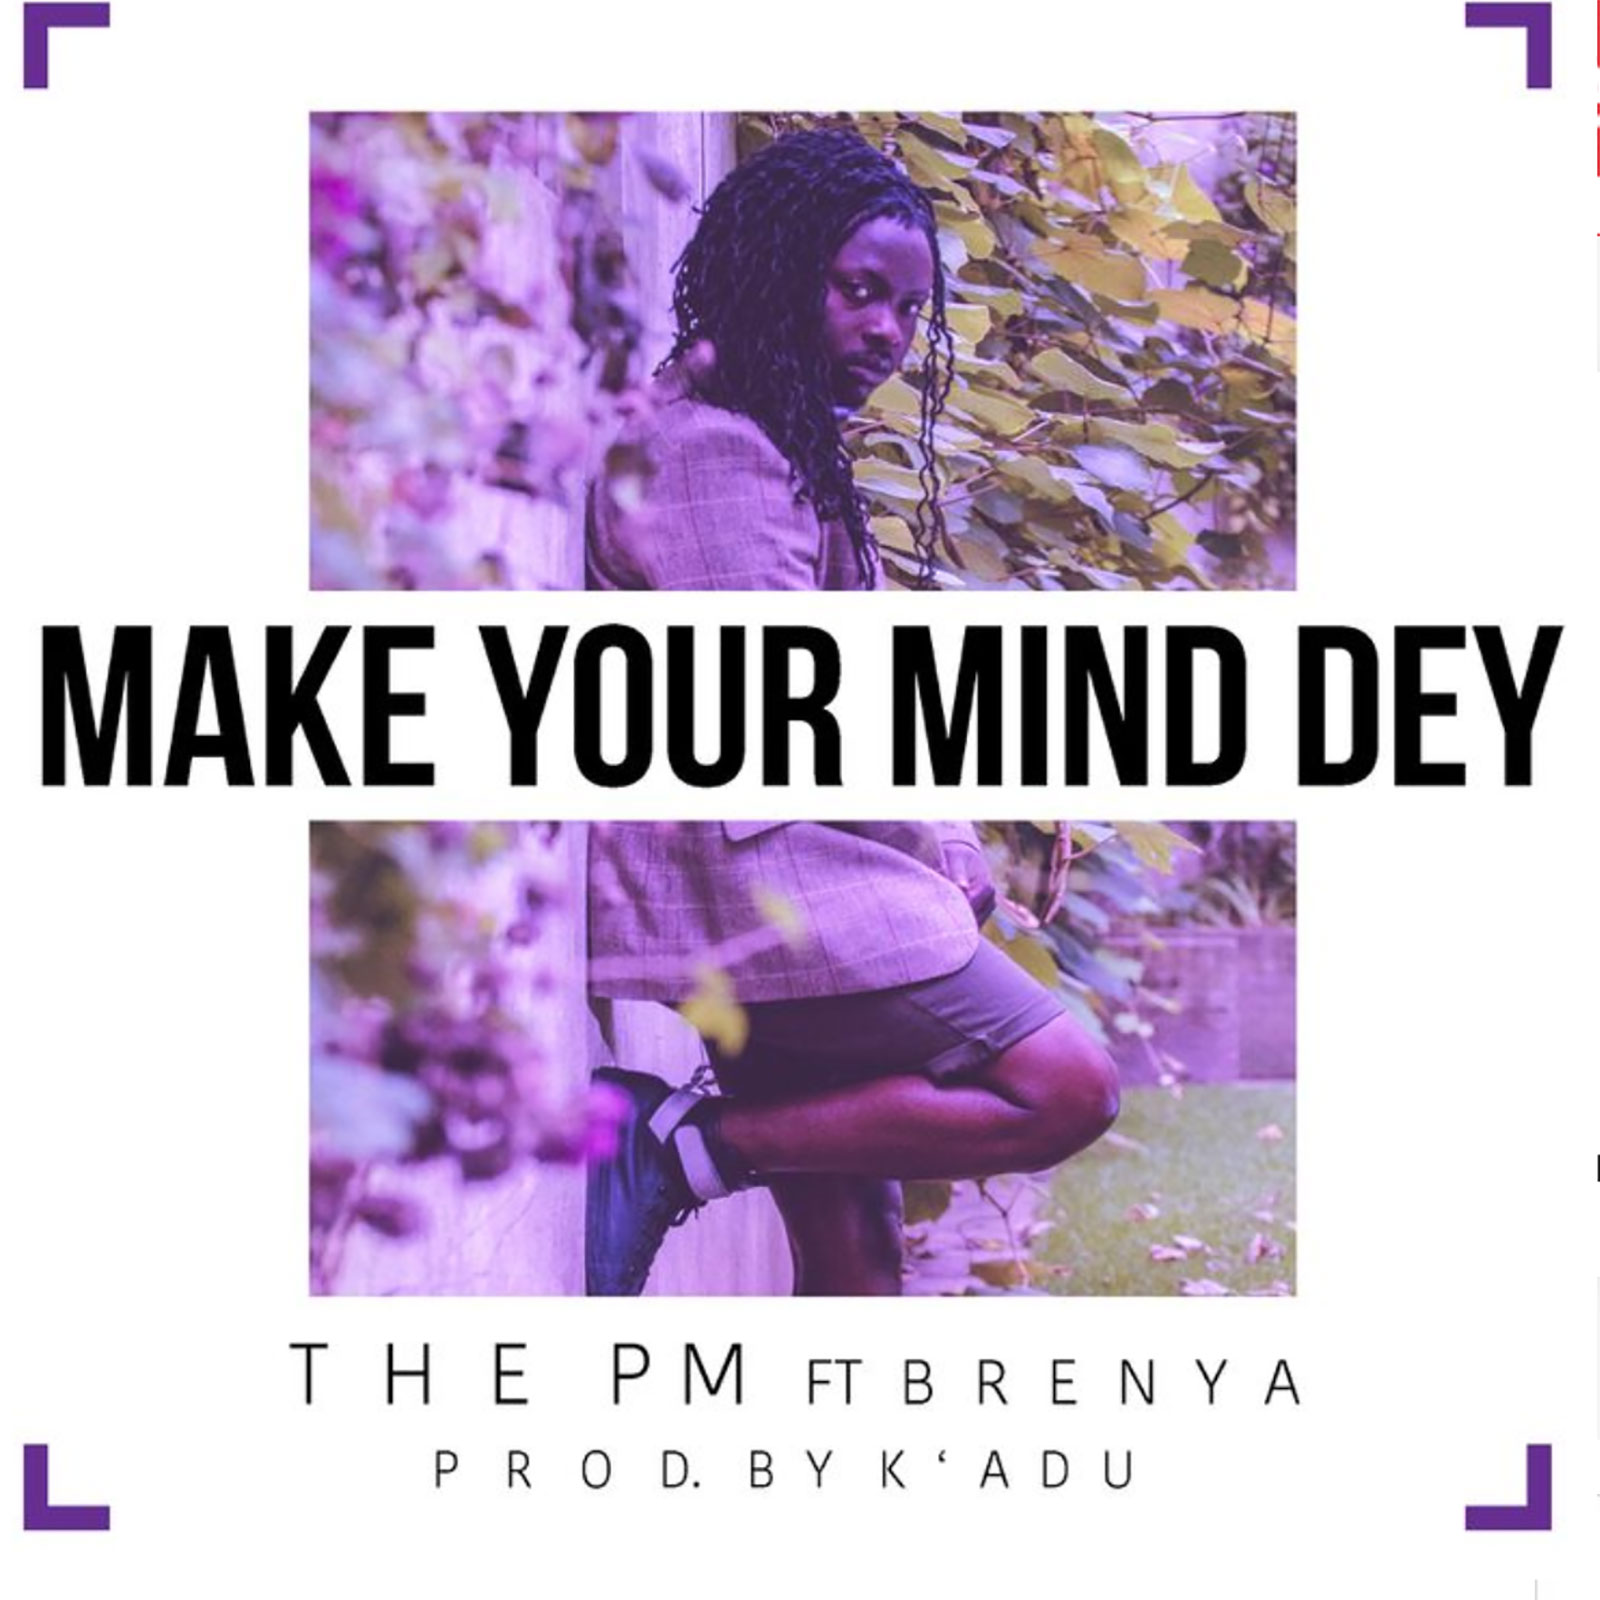 Make Your Mind Dey by The PM feat. Brenya